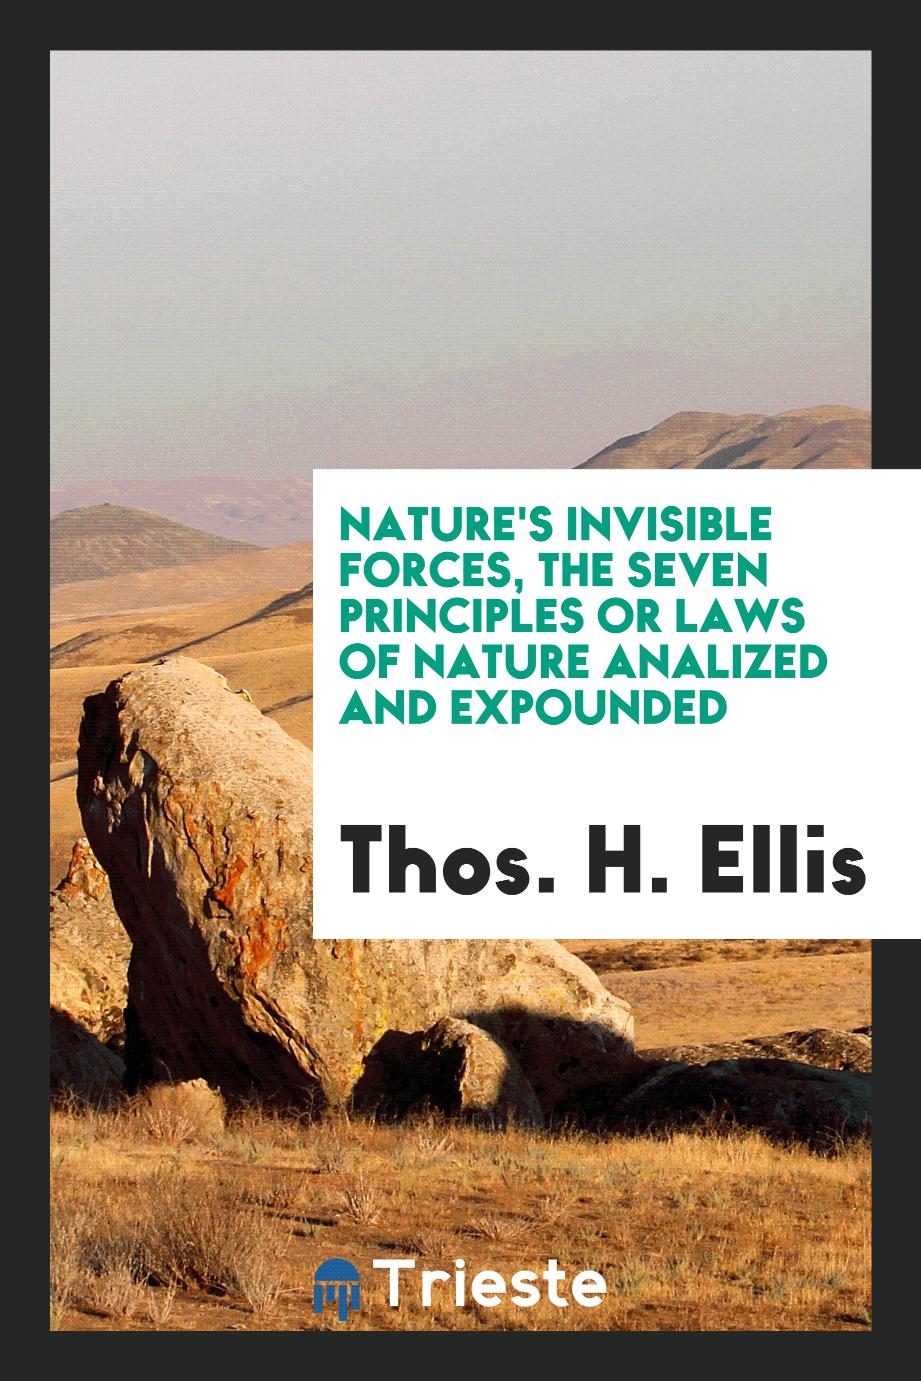 Nature's invisible forces, the seven principles or laws of nature analized and expounded